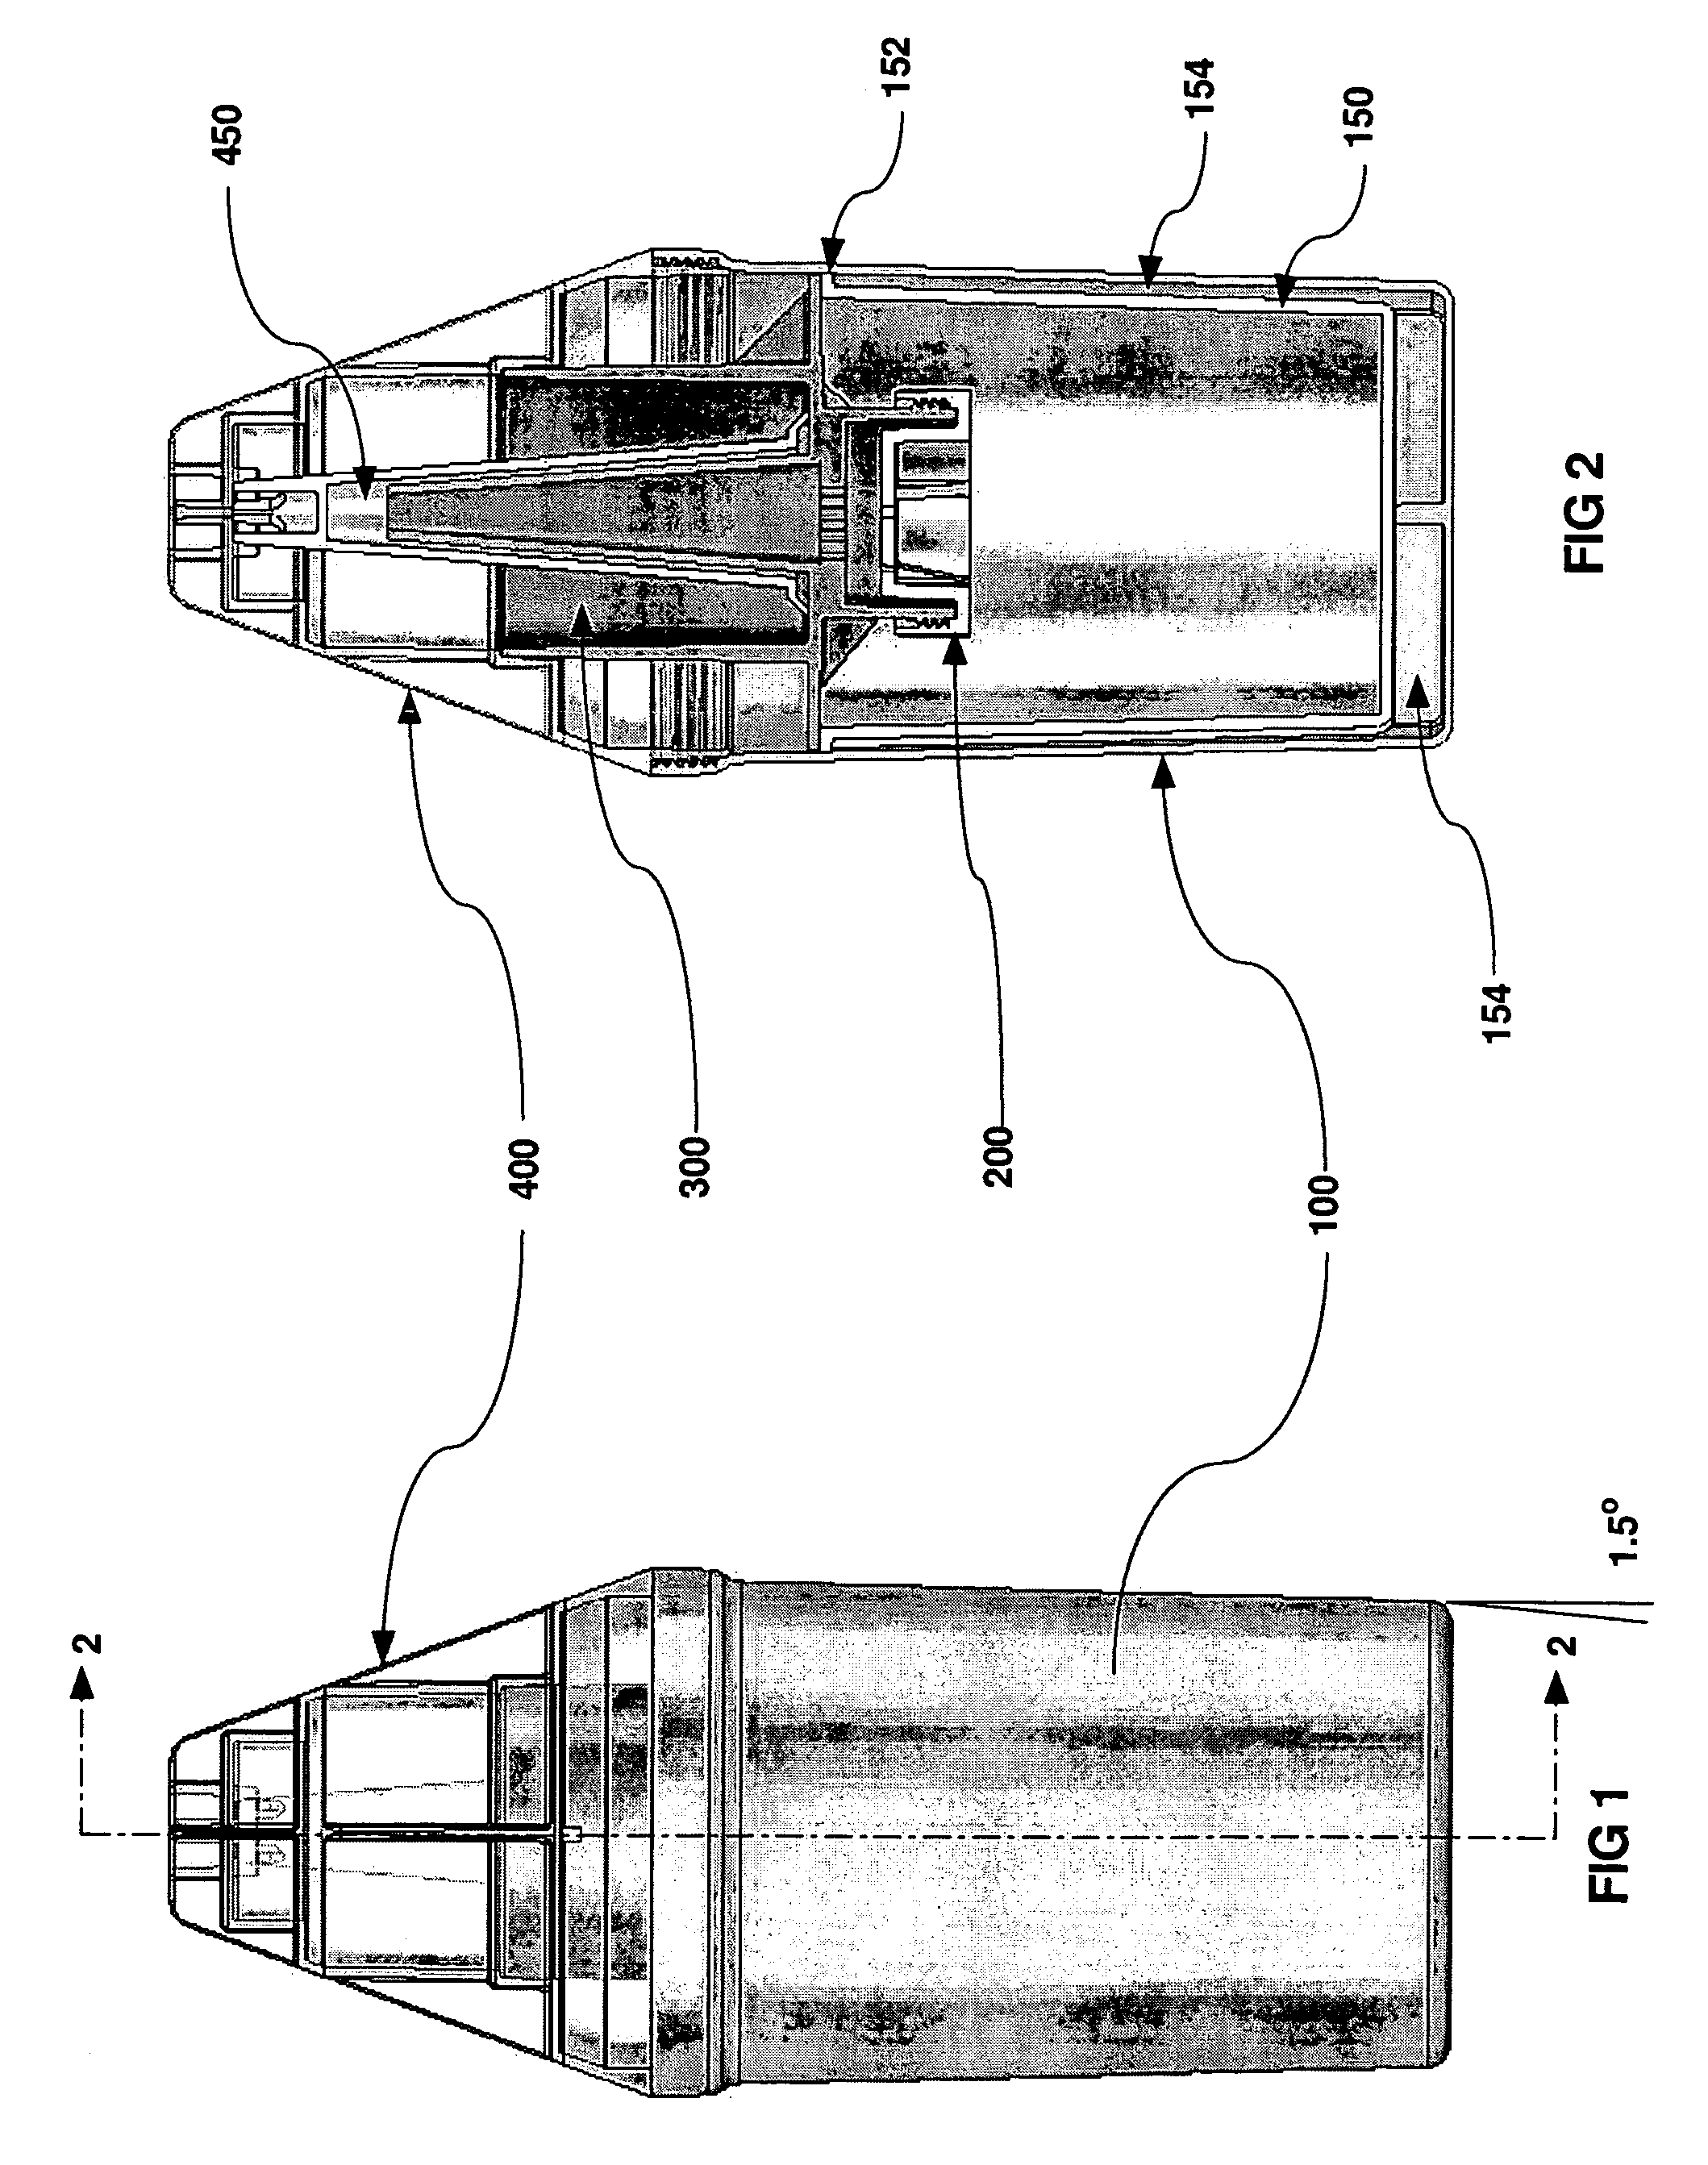 Apparatus and delivery of medically pure oxygen